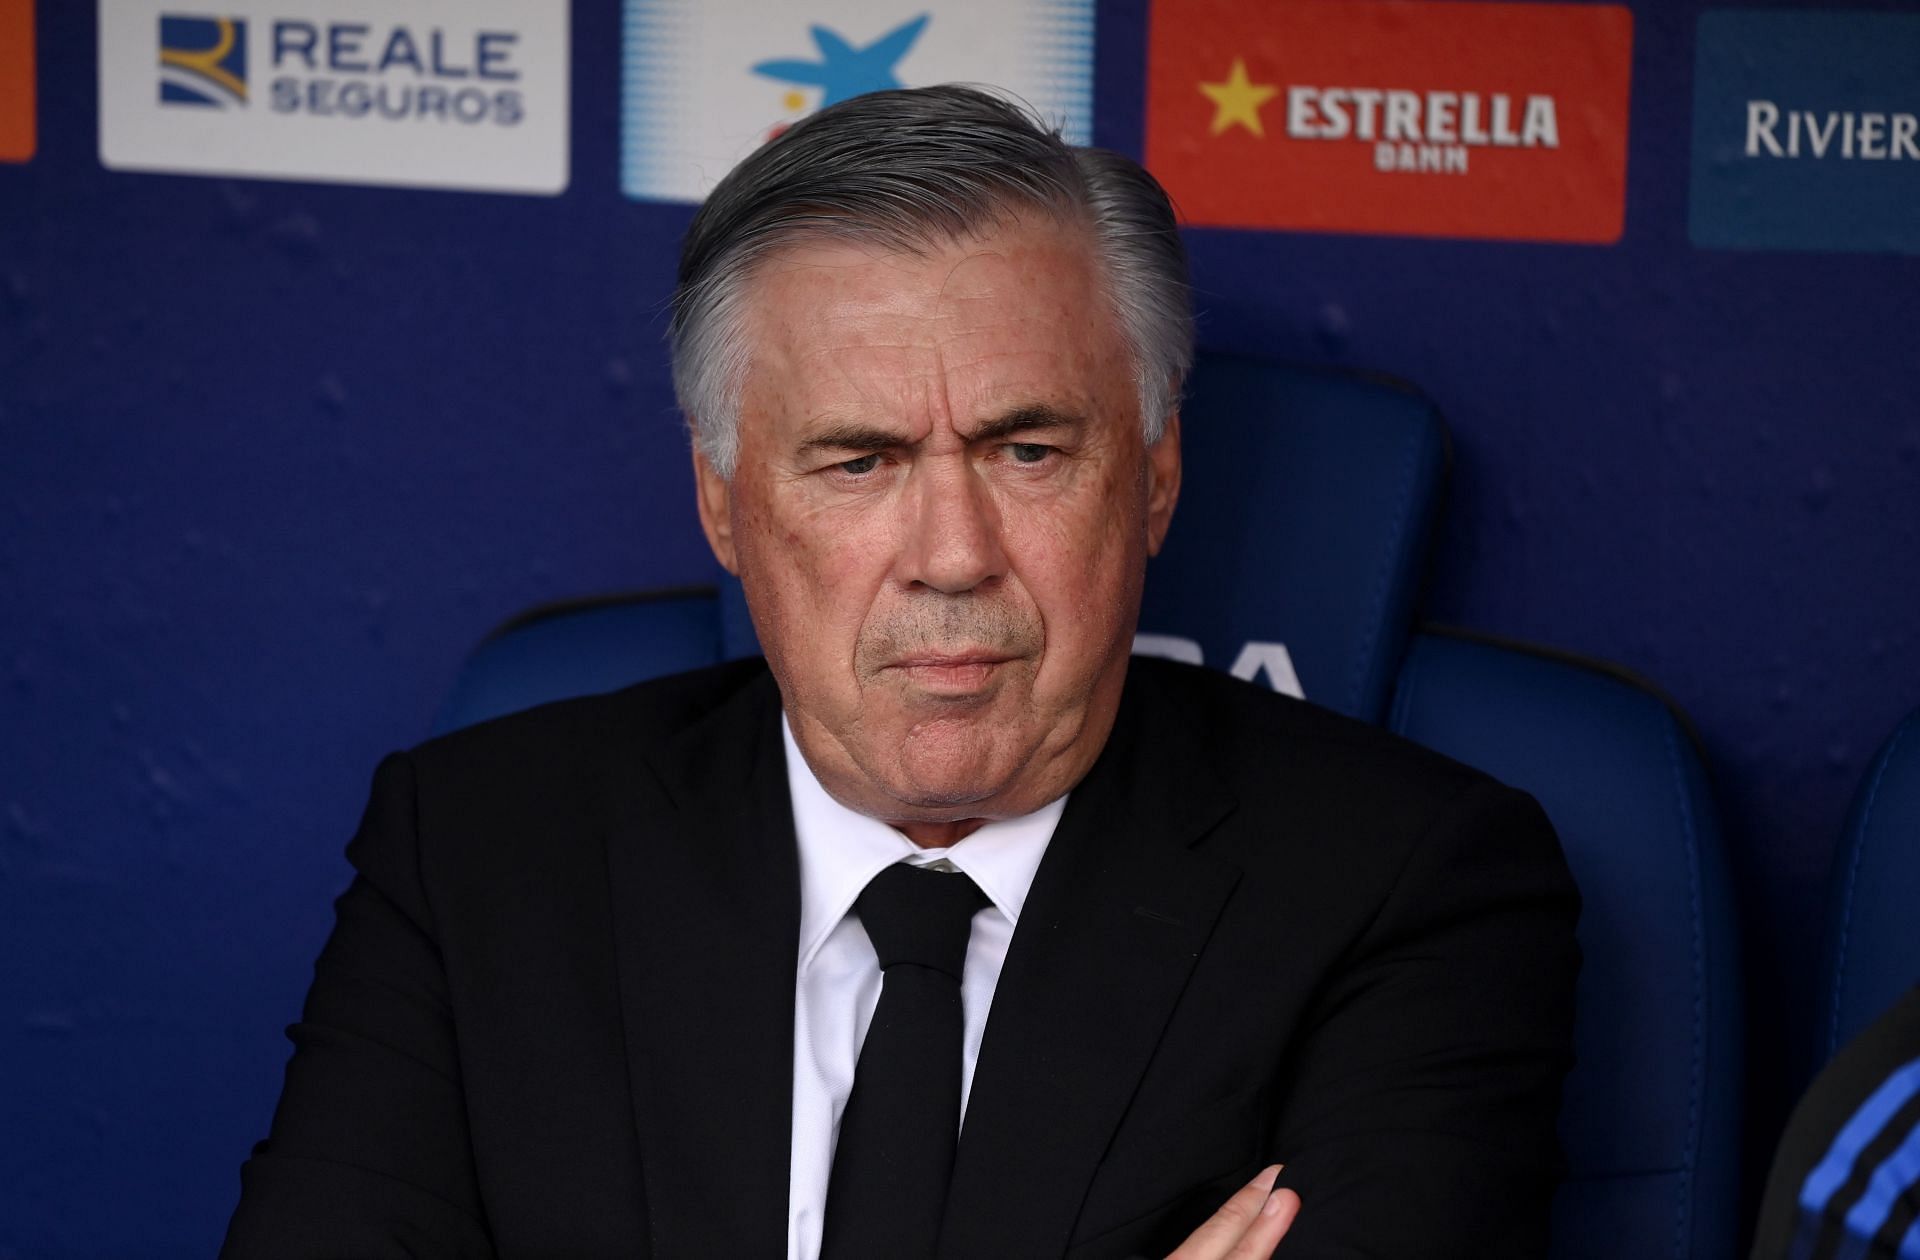 Carlo Ancelotti is one of the most decorated managers in the game.